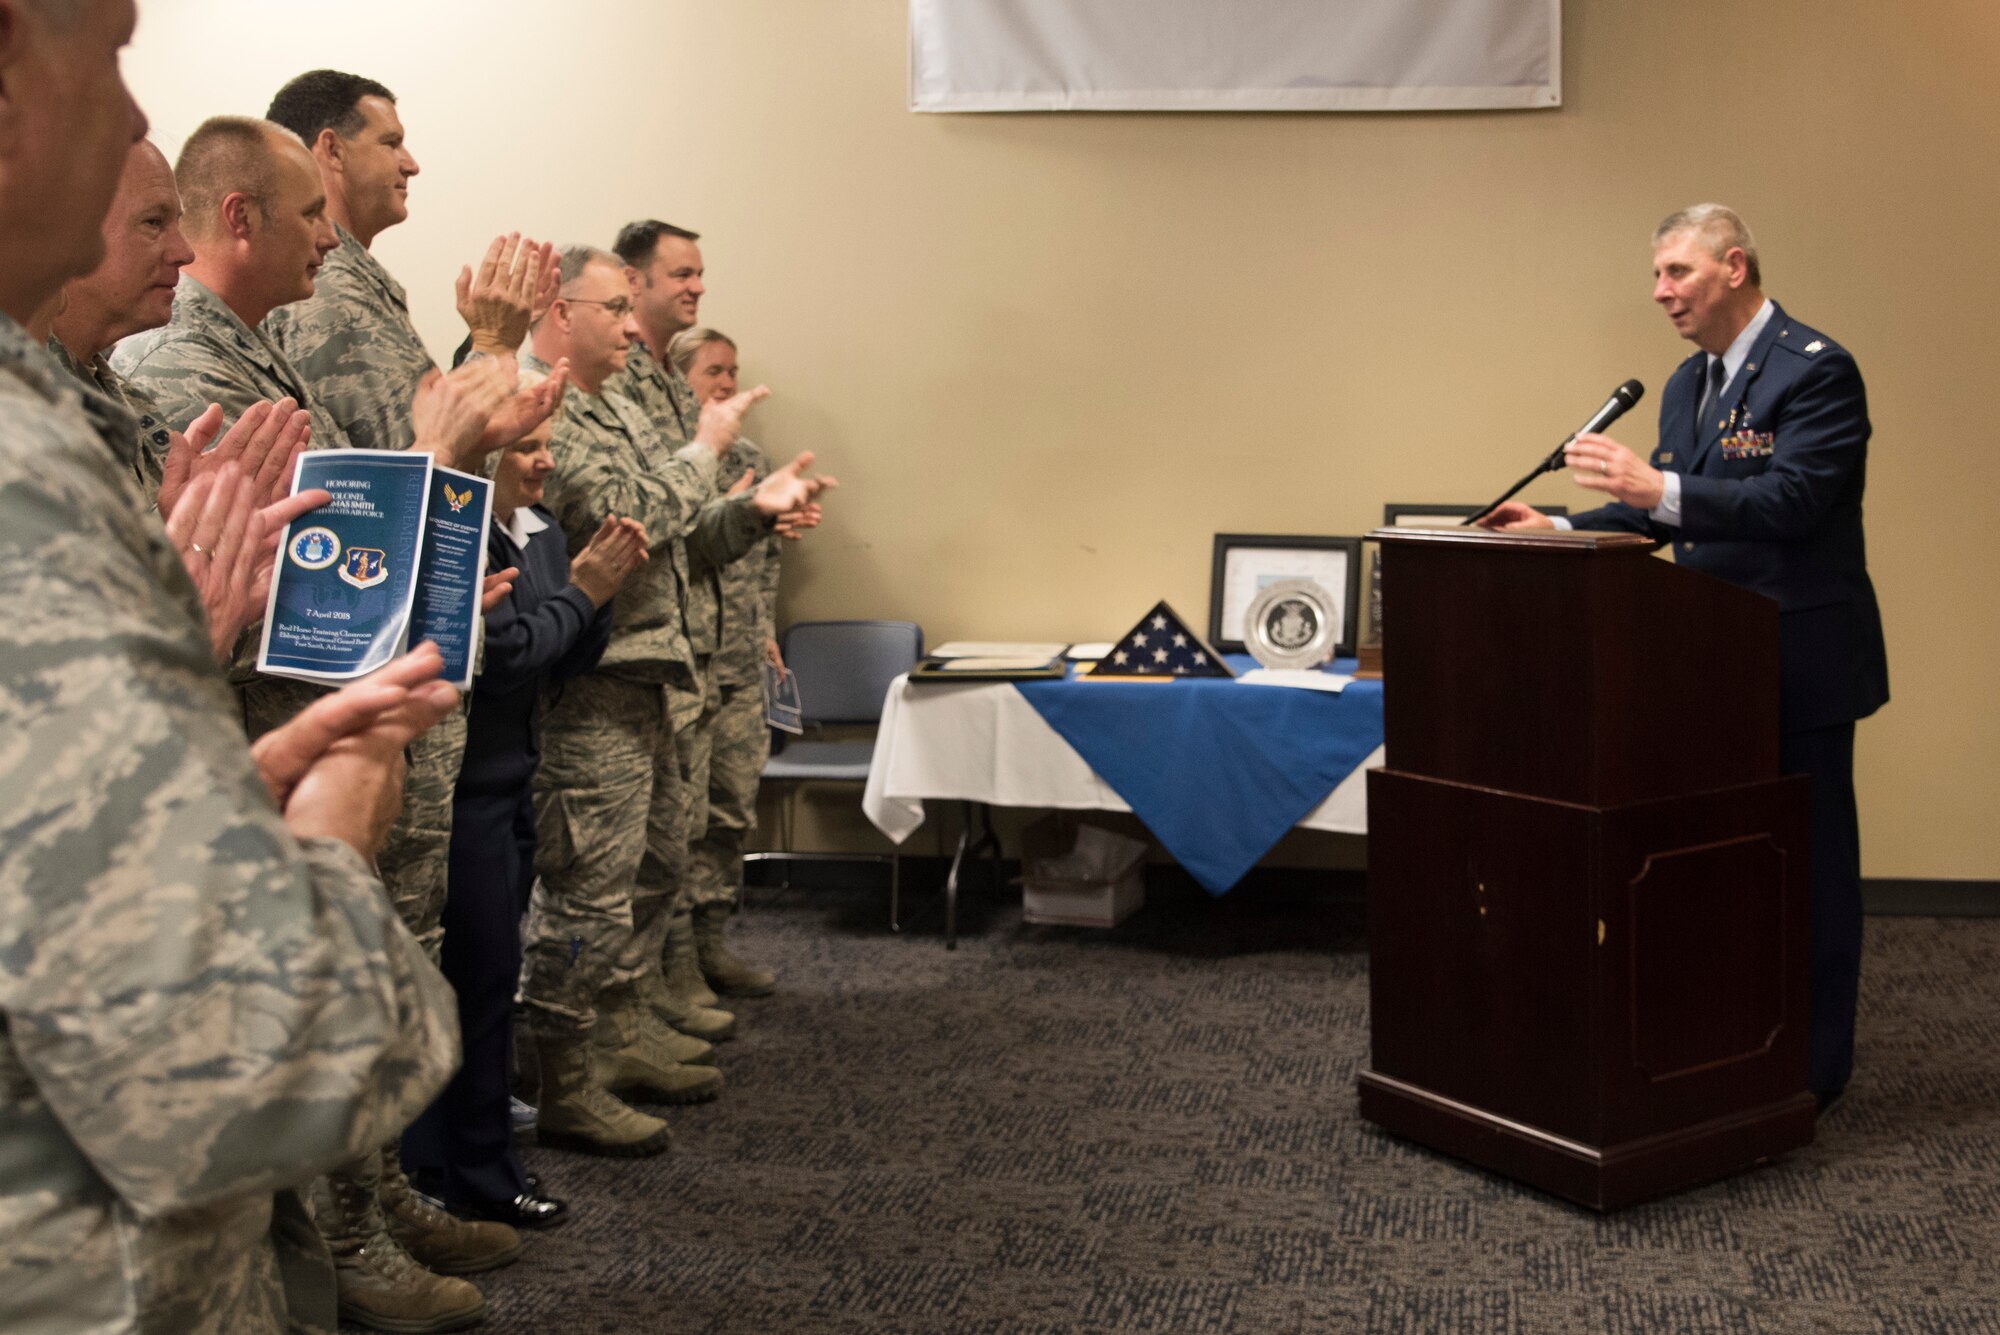 Newly retired Col. Thomas Smith, former Joint Force Headquarters Command Chaplain, addresses members of the 188th Wing during his retirement ceremony at Fort Smith, AR., Apr. 07, 2018. (U.S. Air National Guard photo by Tech. Sgt. Daniel Condit)